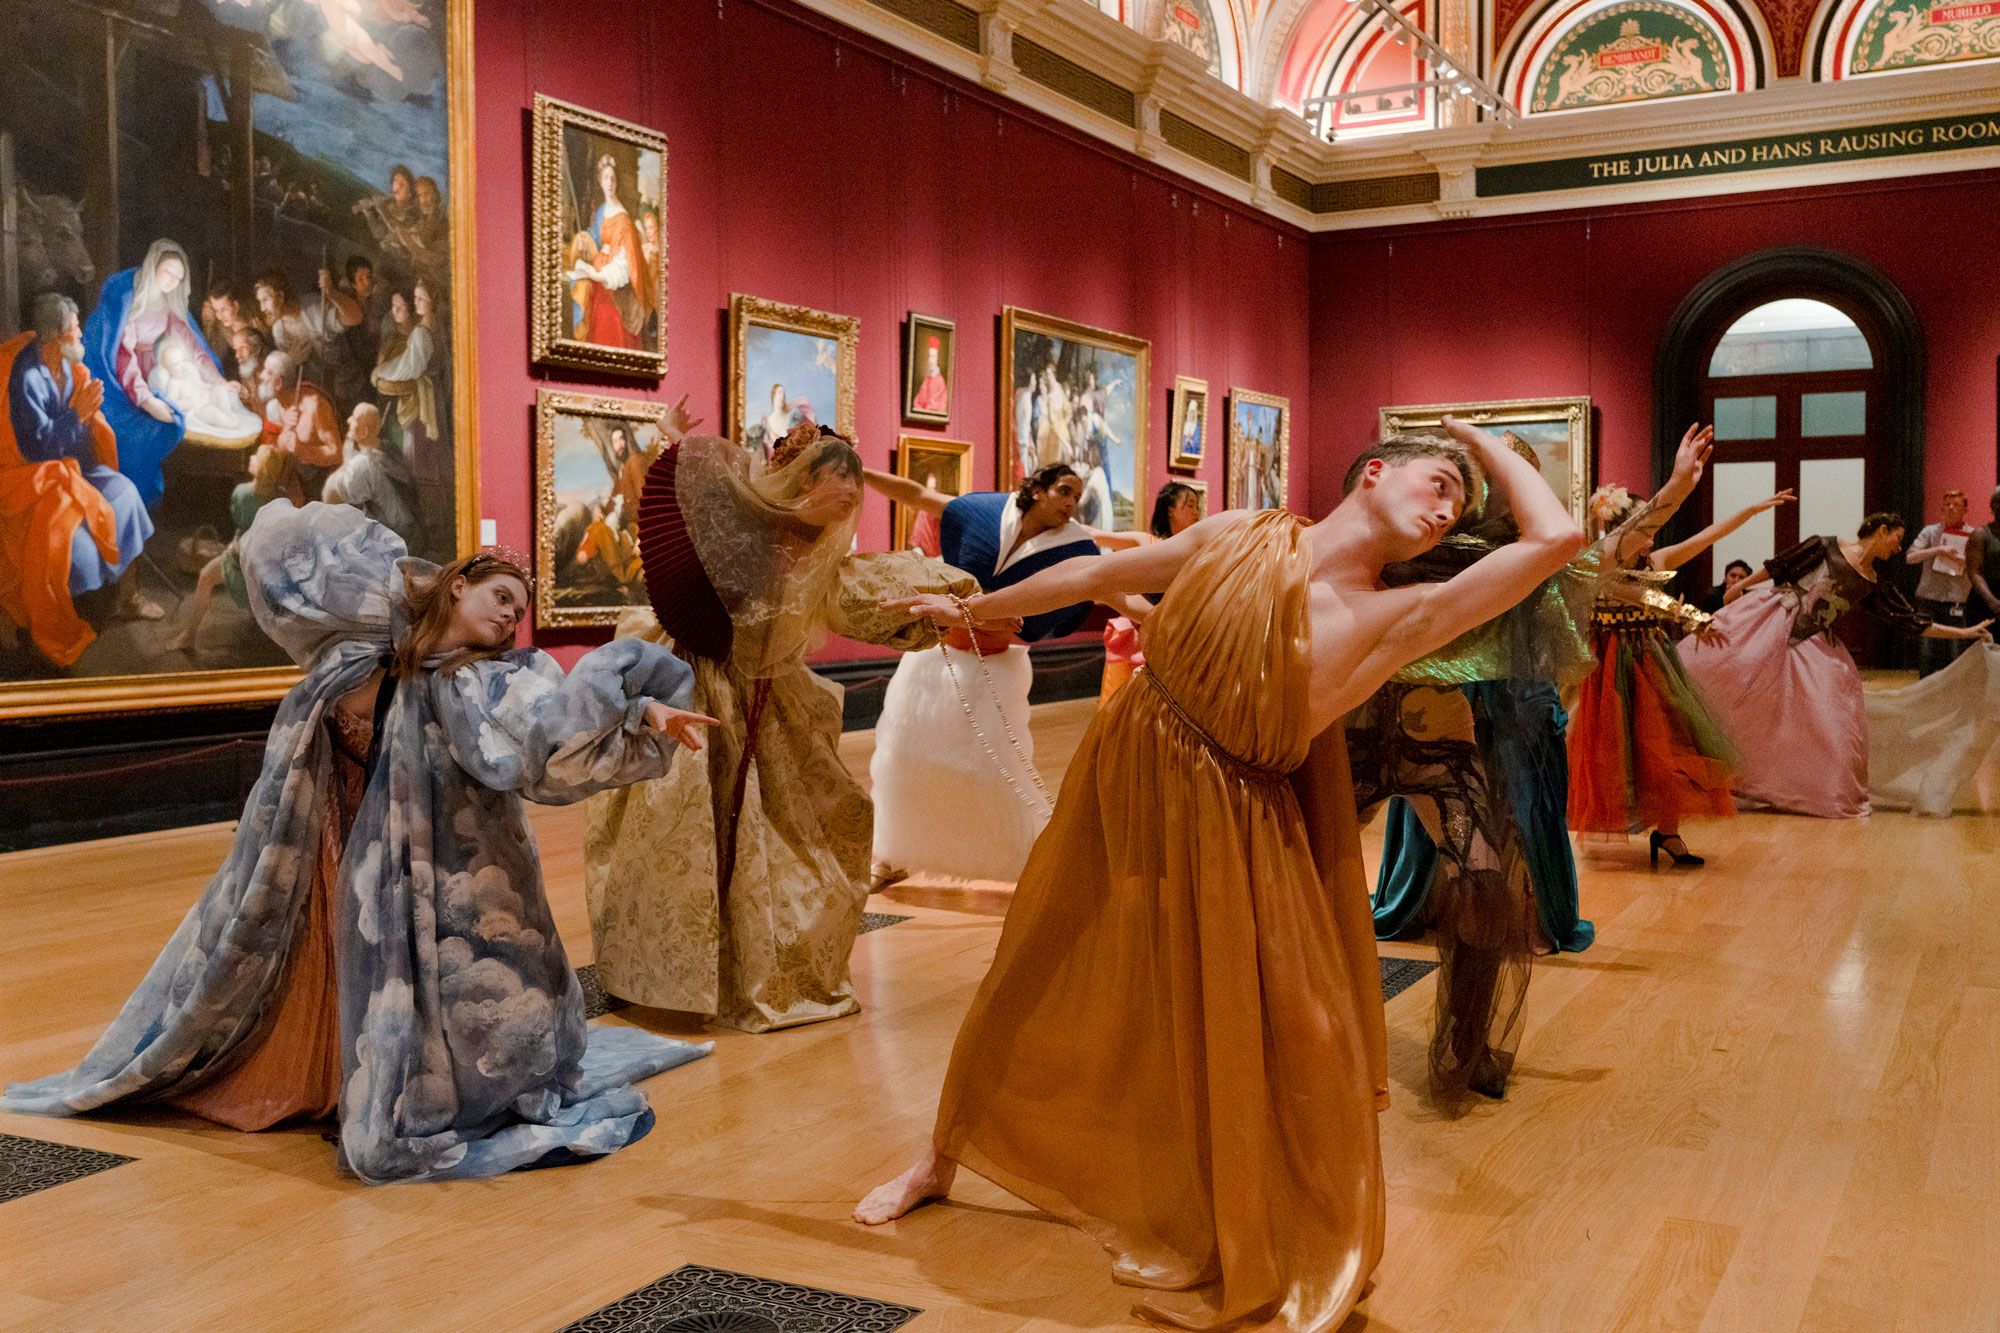 A group of people in different elaborate costumes dance in formation, all with their arm out-stretched, in a large ornate gallery space.